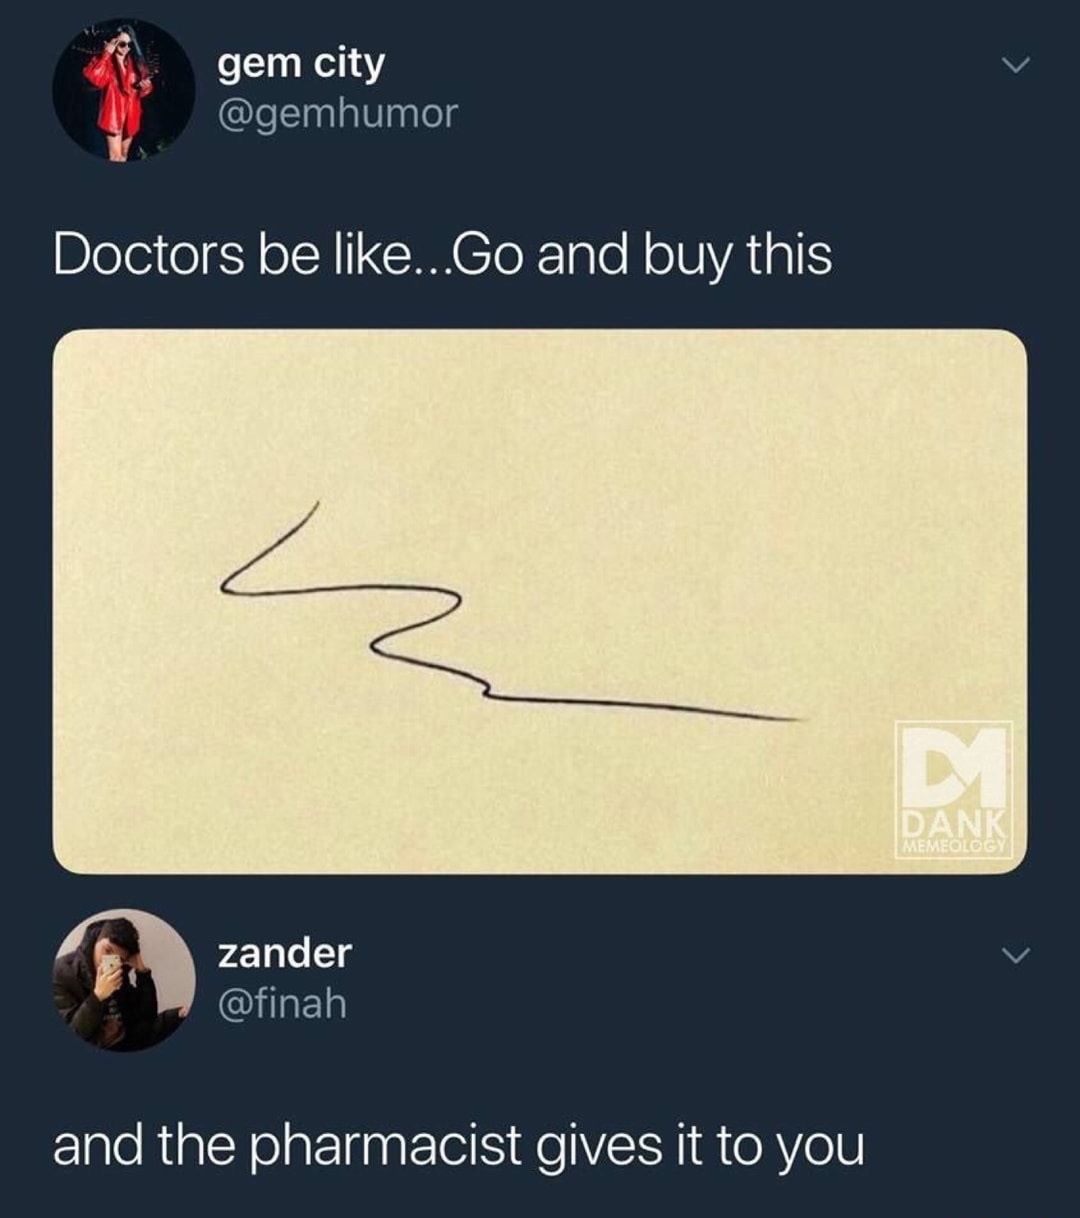 calligraphy memes - gem city Doctors be ...Go and buy this Dank Memeology zander zander and the pharmacist gives it to you